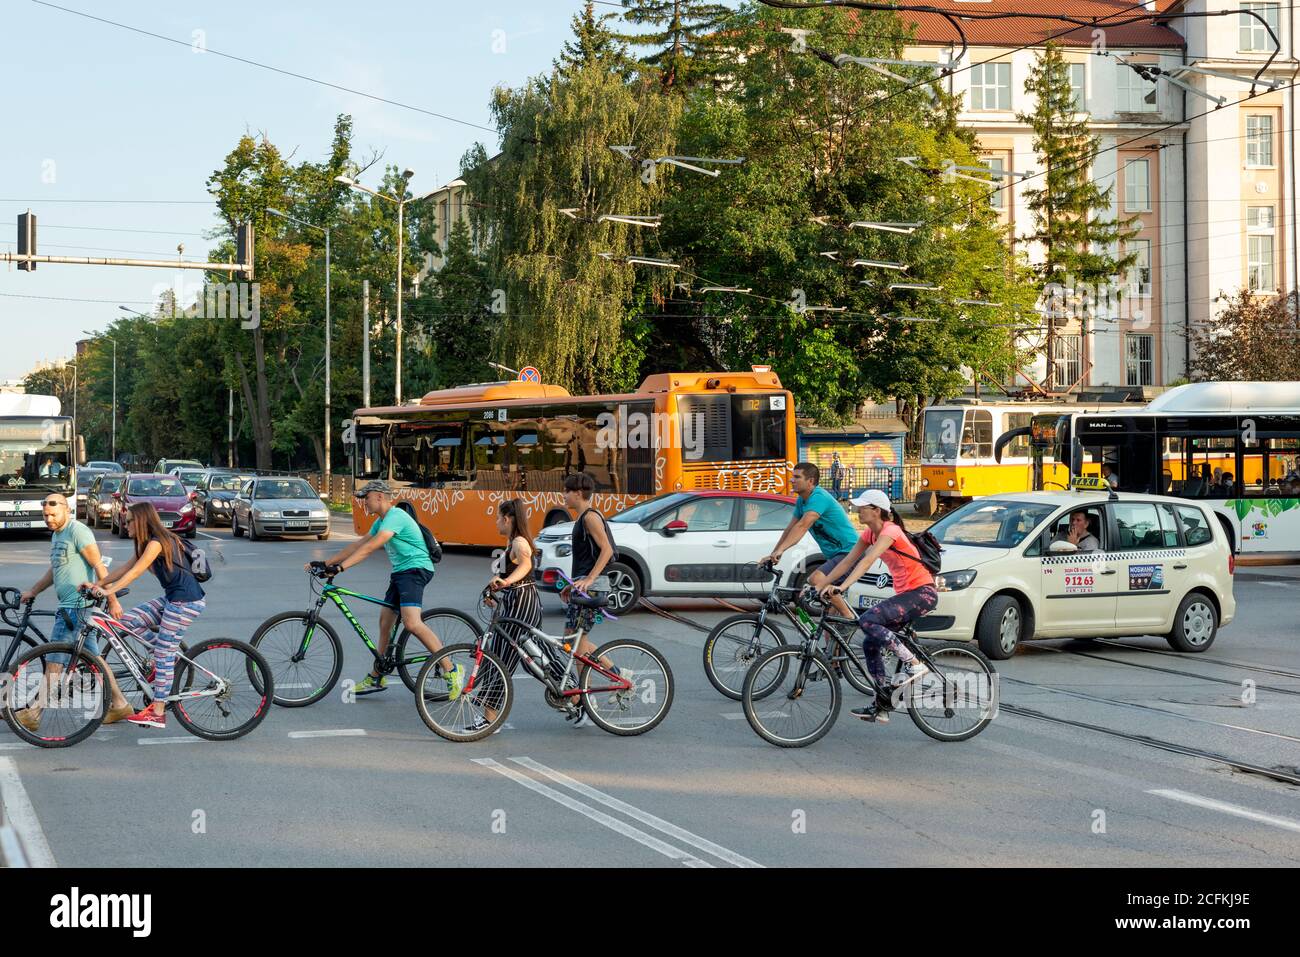 Busy urban street scene during rush hour with car traffic buses trams commuters people and cyclists in downtown Sofia Bulgaria Stock Photo